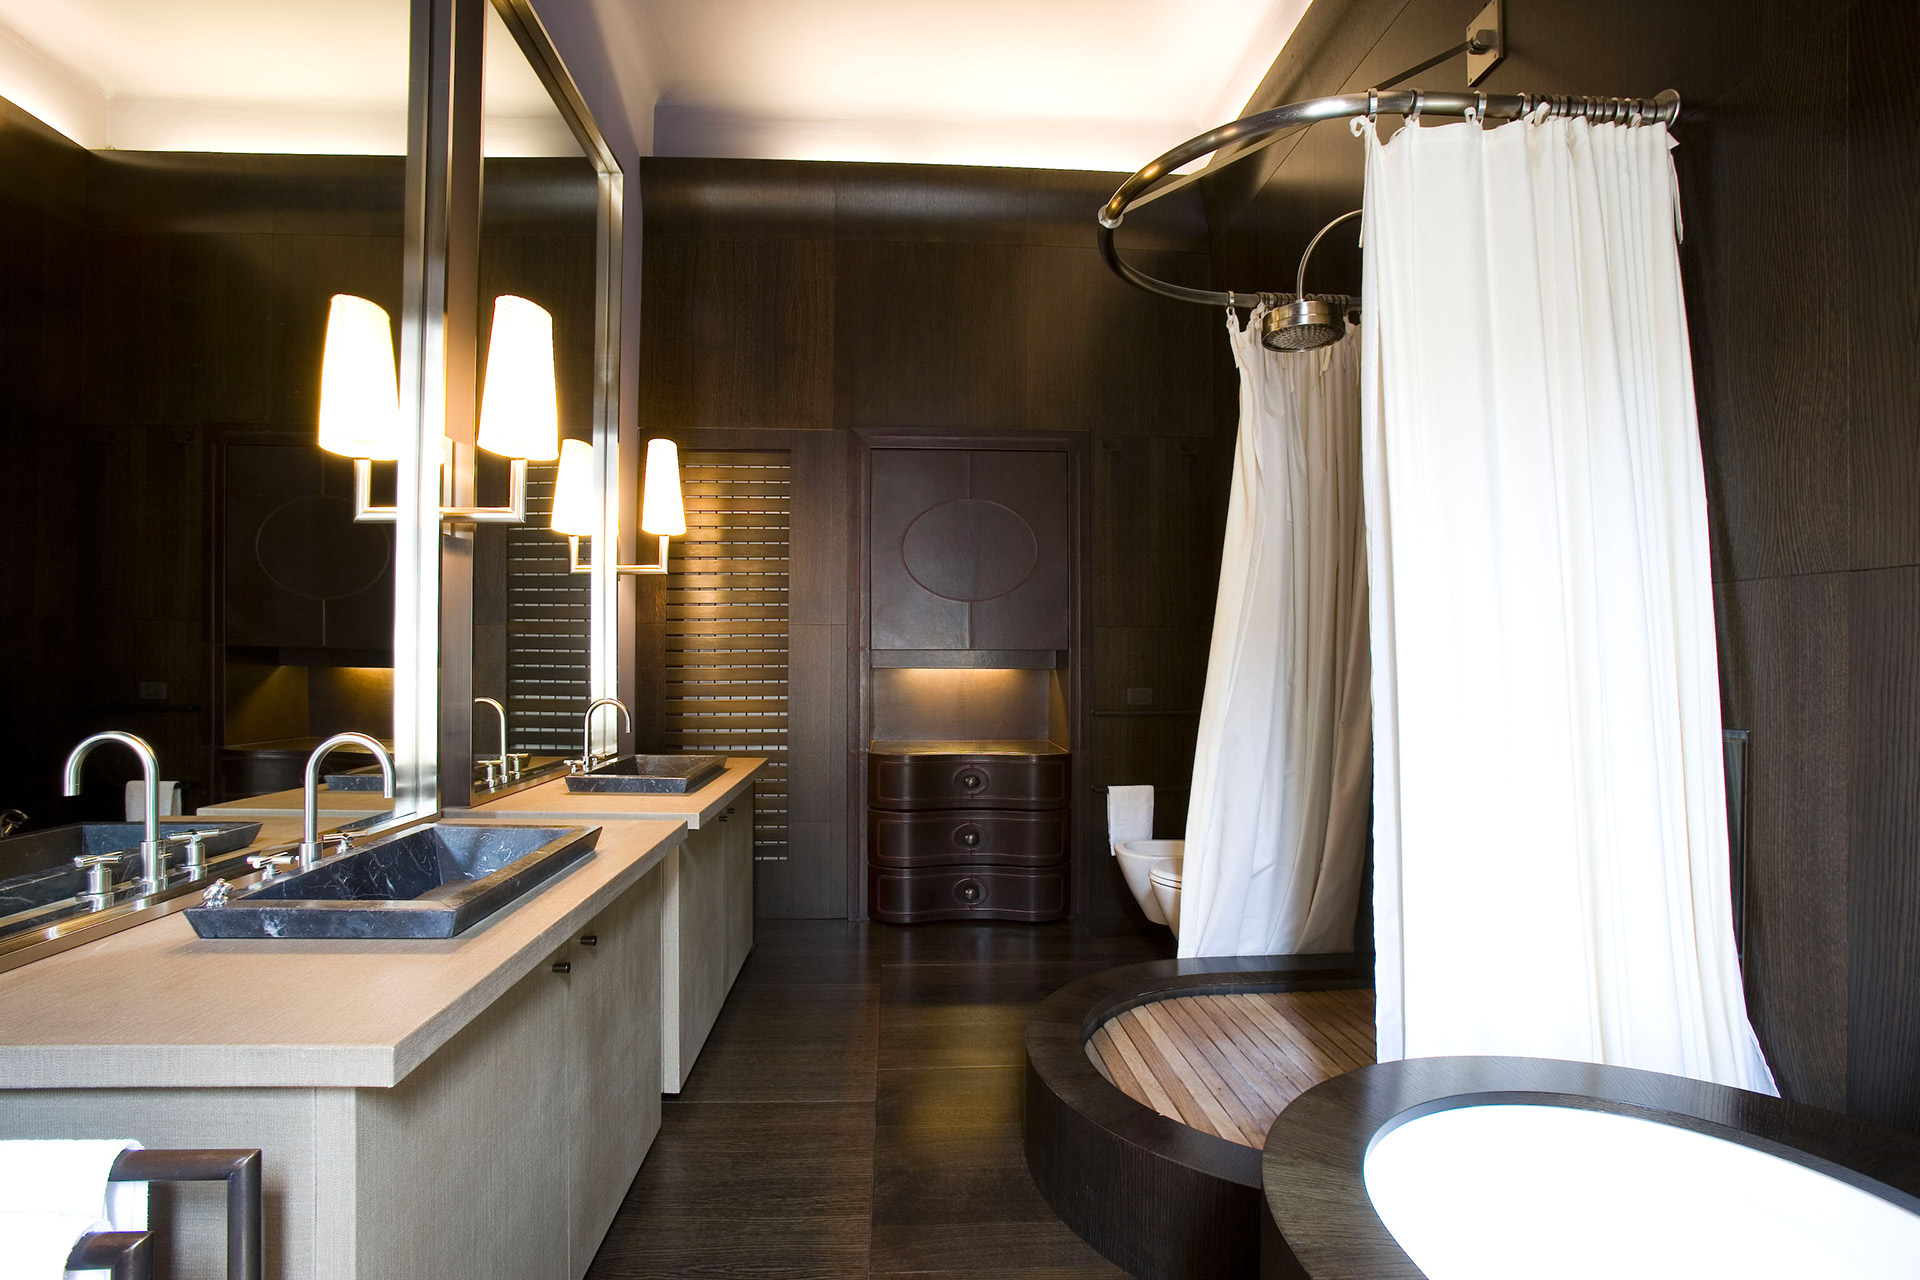 Bathroom of a private residence in Milan furnished with Promemoria | Promemoria